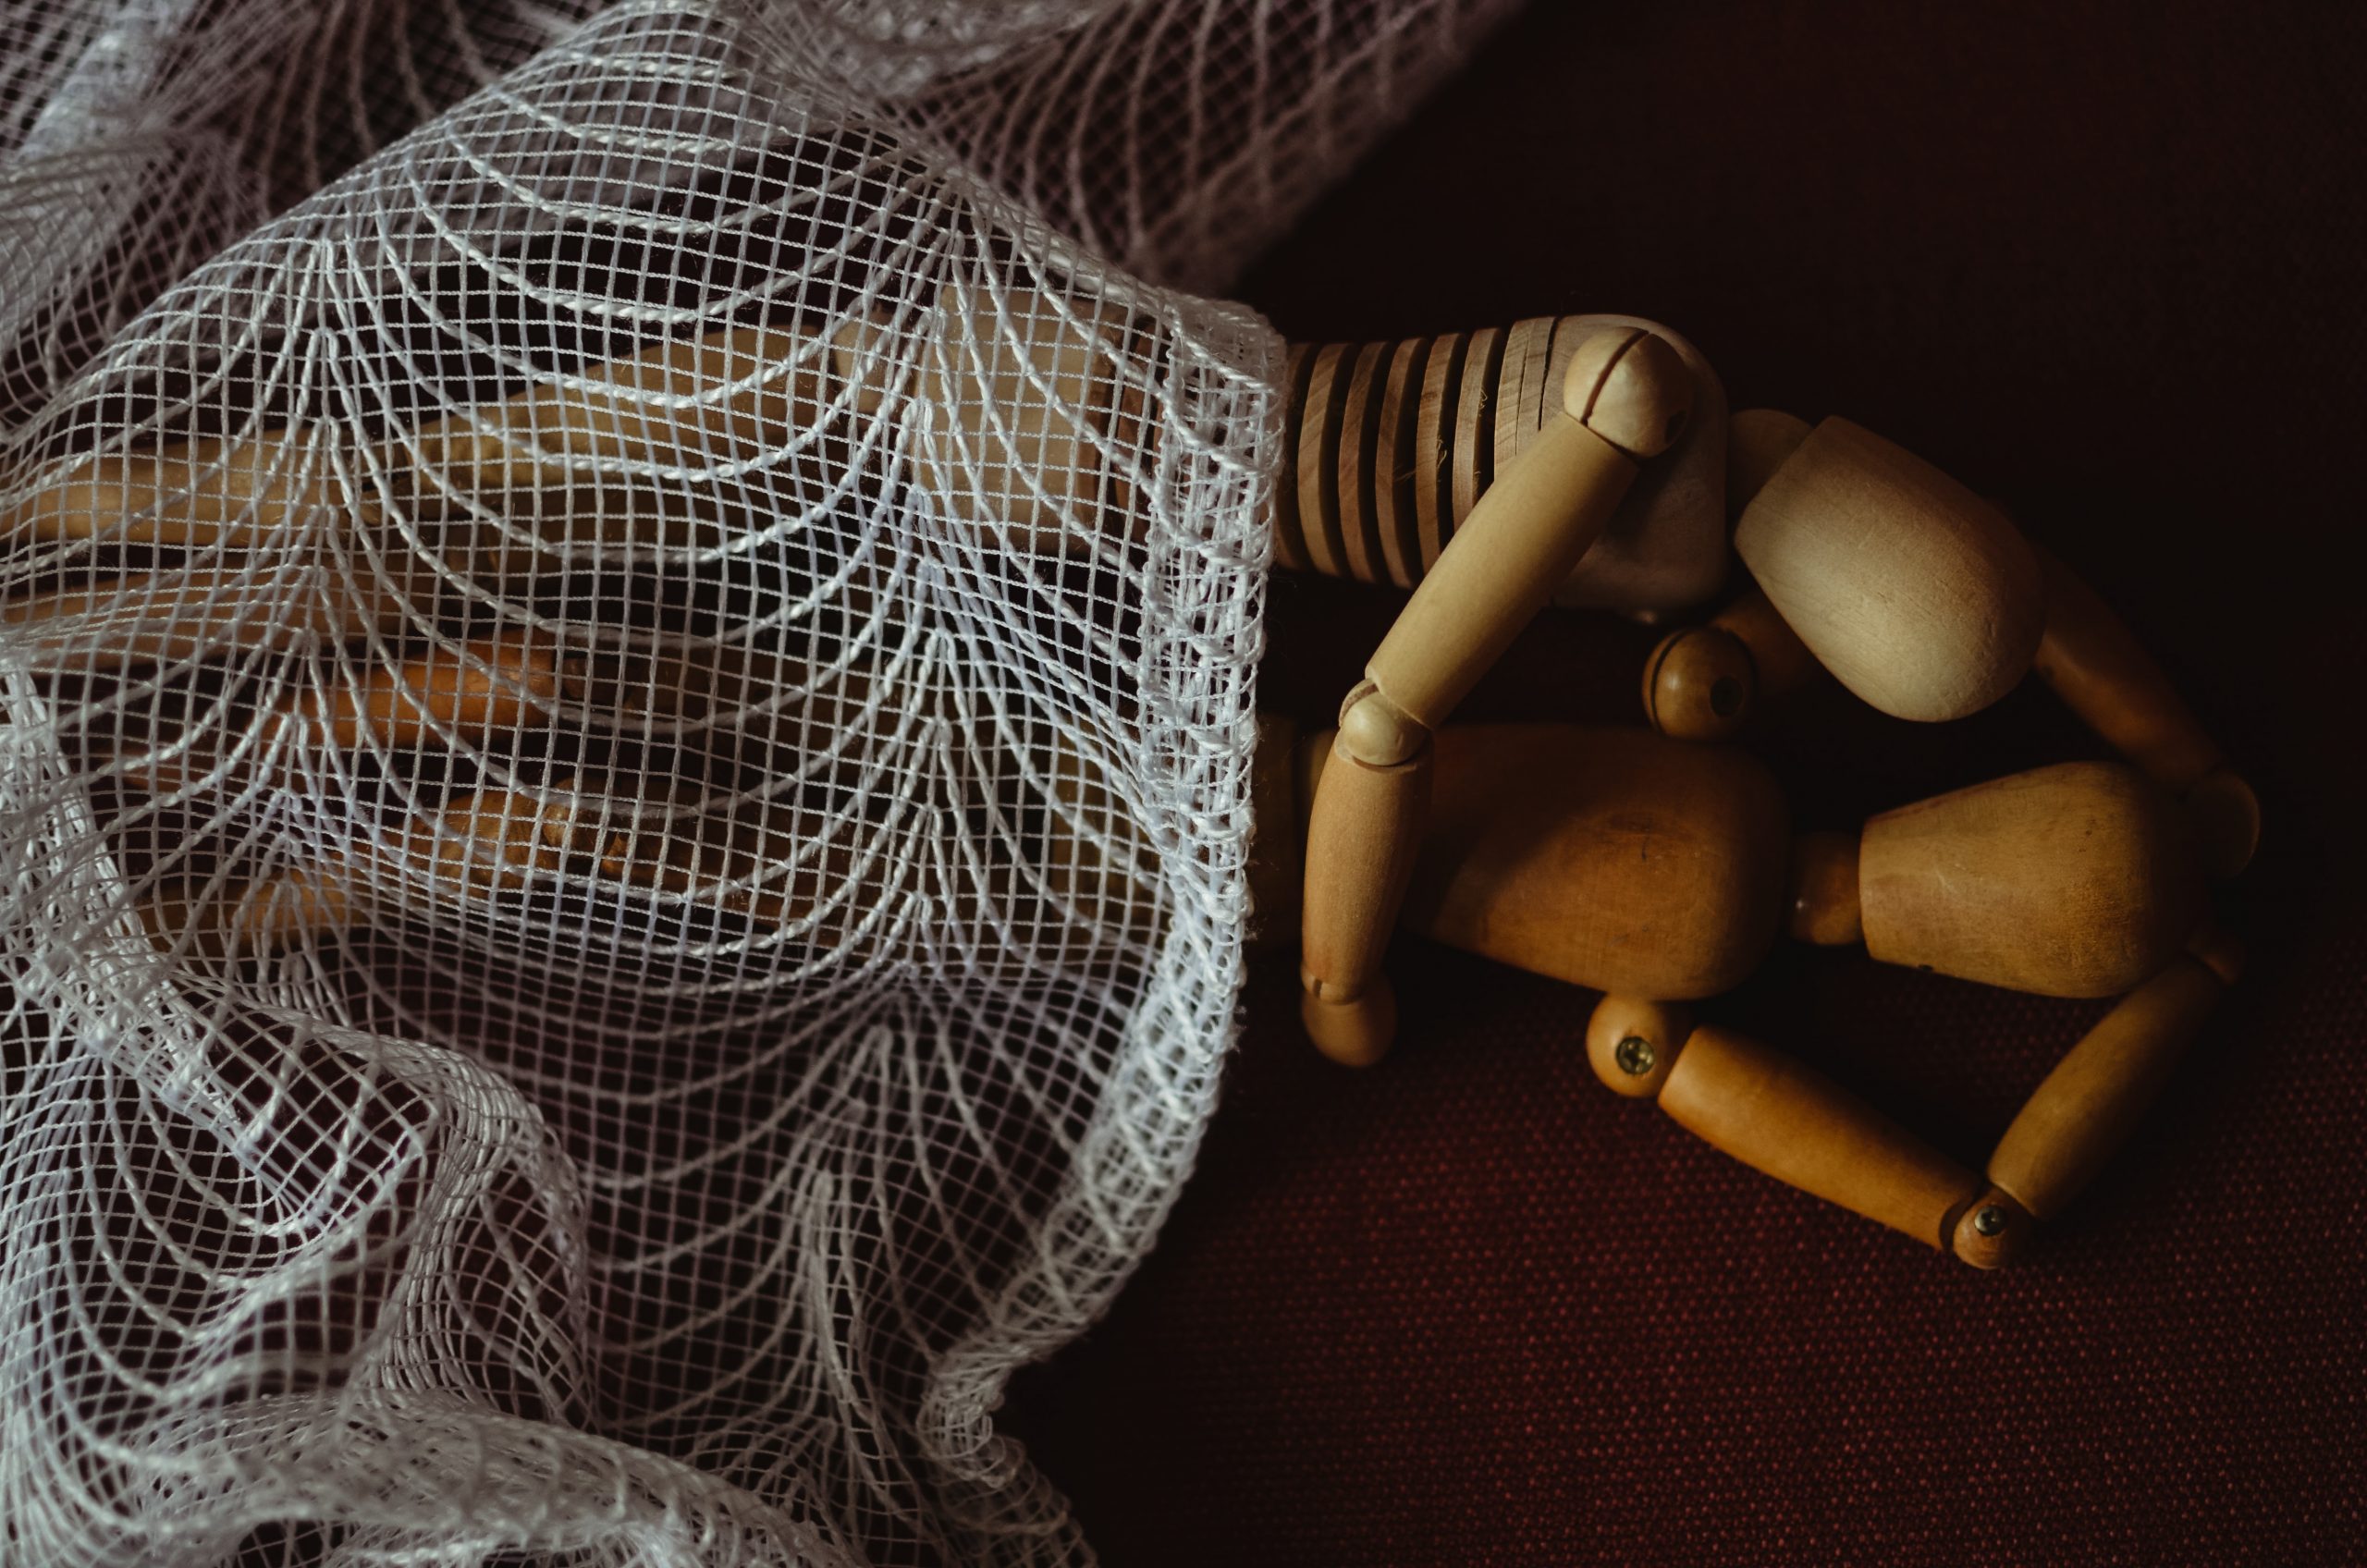 figurines lying down hugging each other under net blanket demonstrating a position after sex after birth